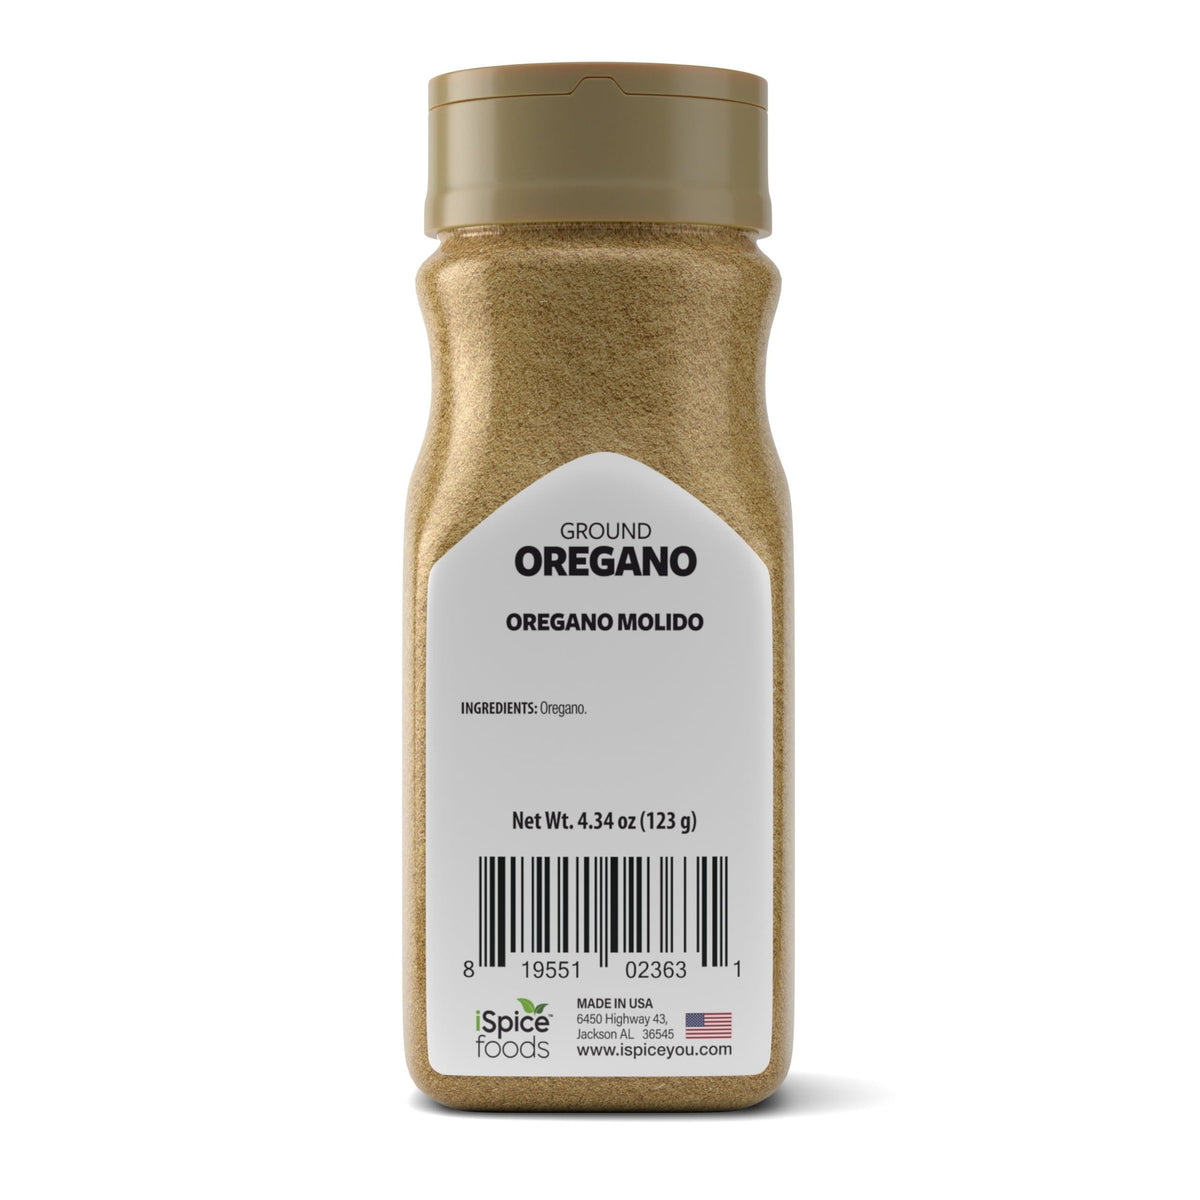 6 Reasons To Use Oregano Ground in Your Recipes